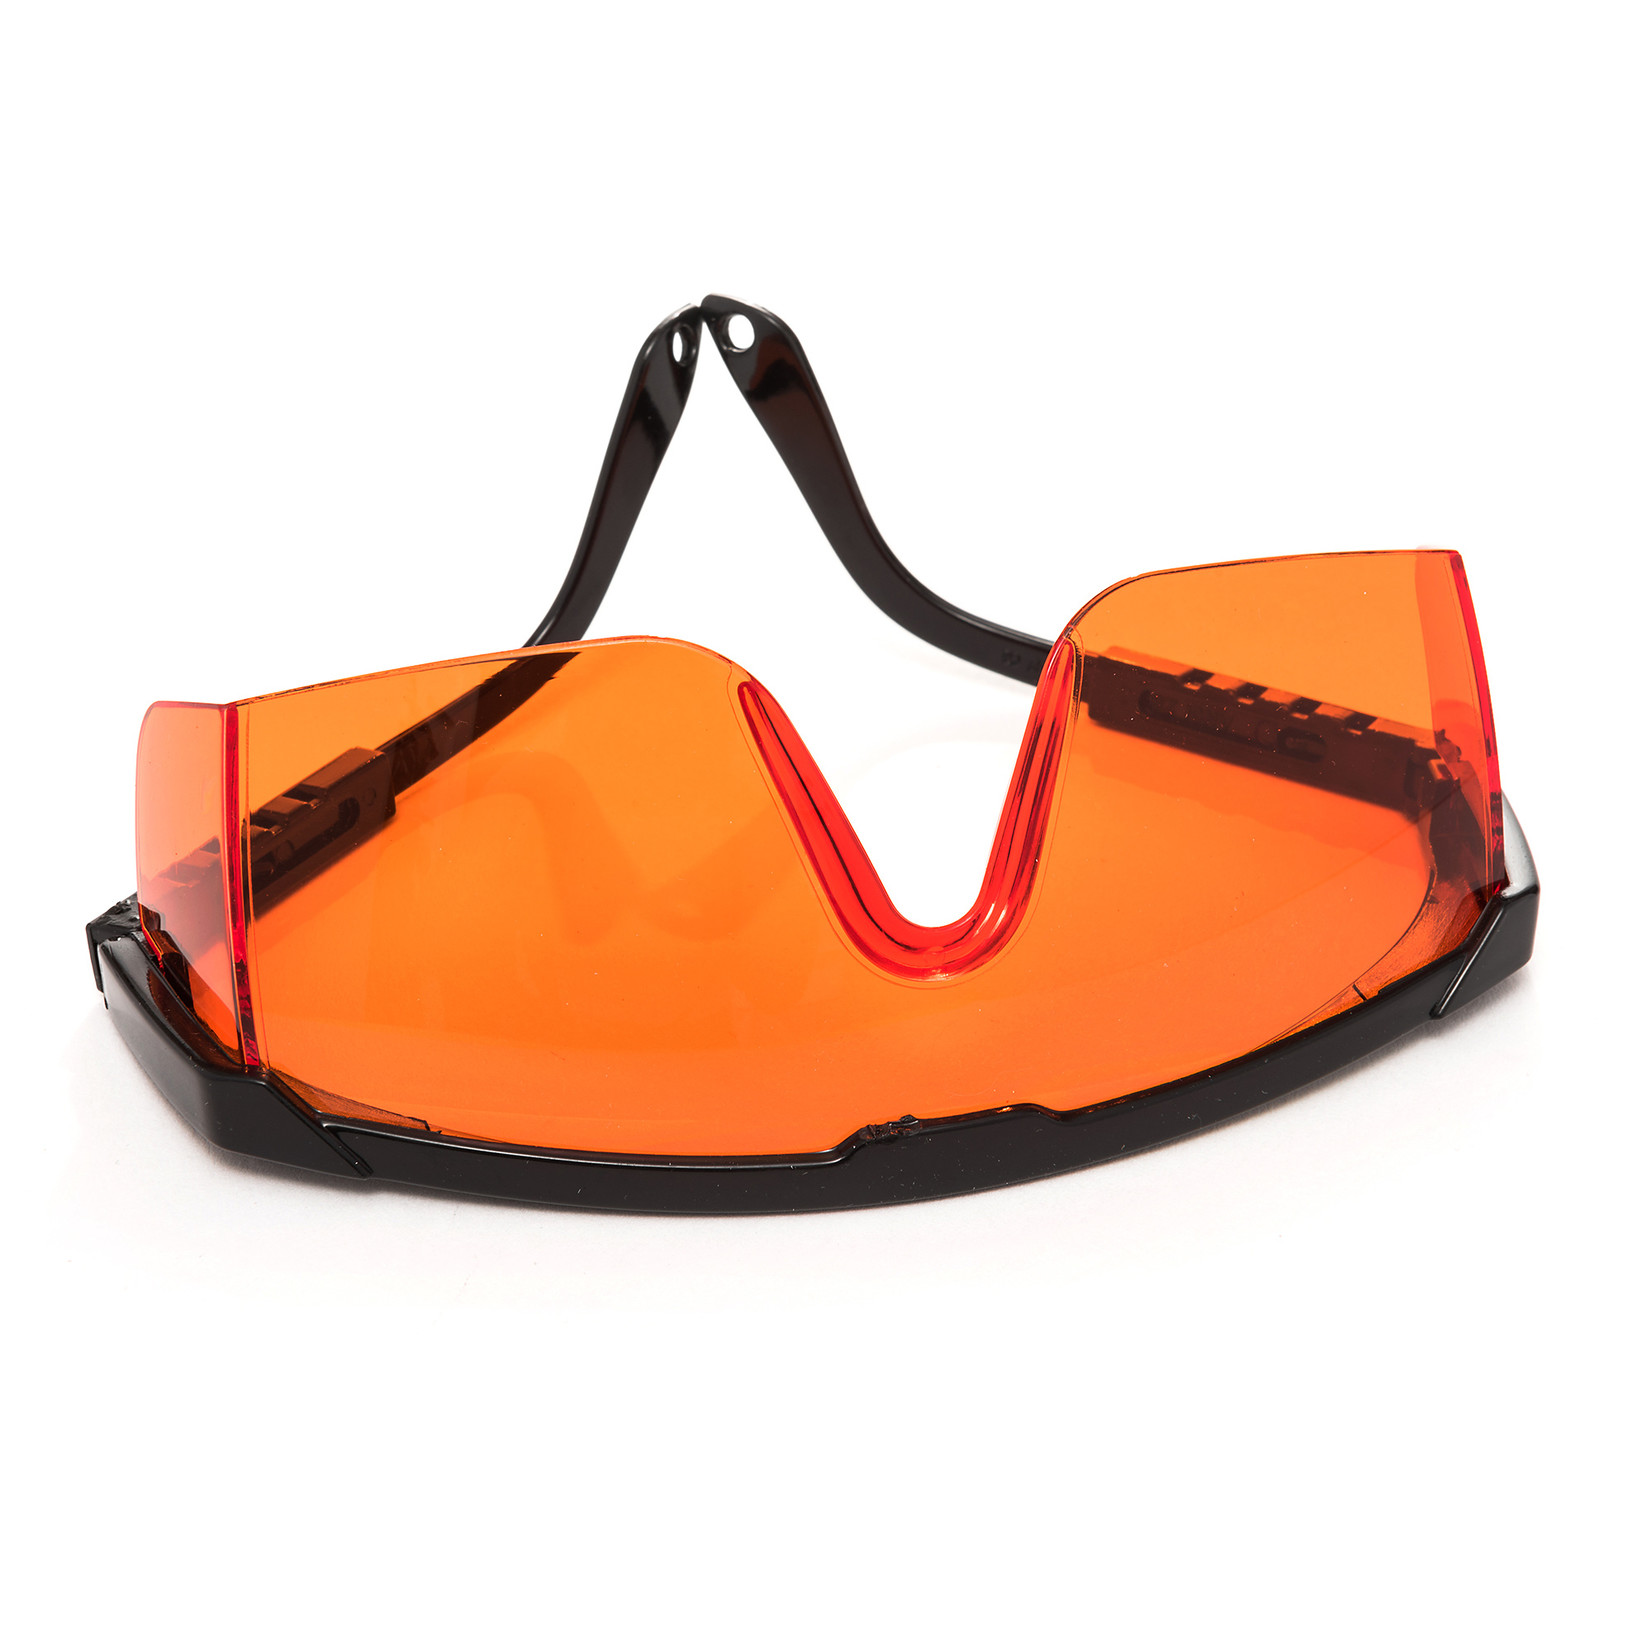 Lunette protectrice